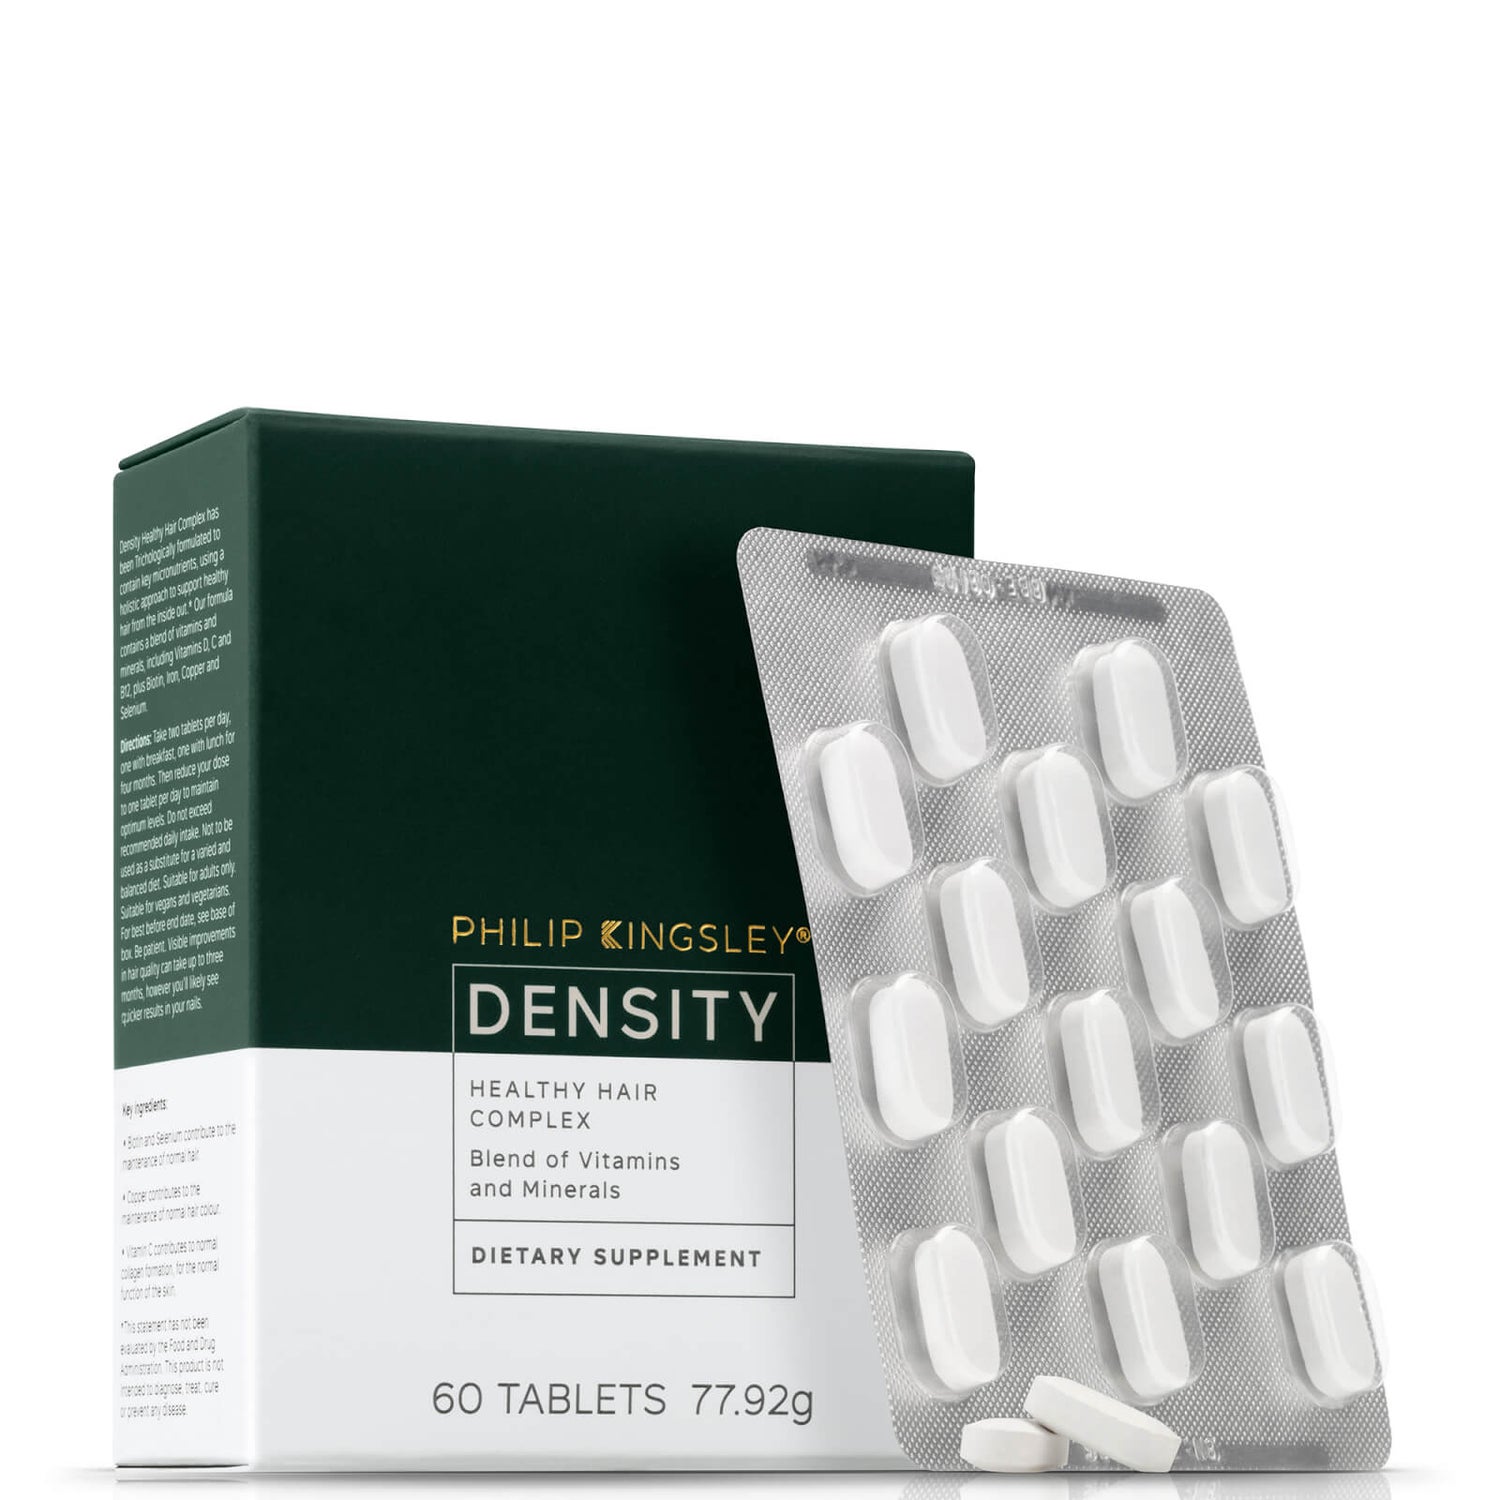 Philip Kingsley Density Healthy Hair Complex Supplement - 60 Tablets - FREE  Delivery